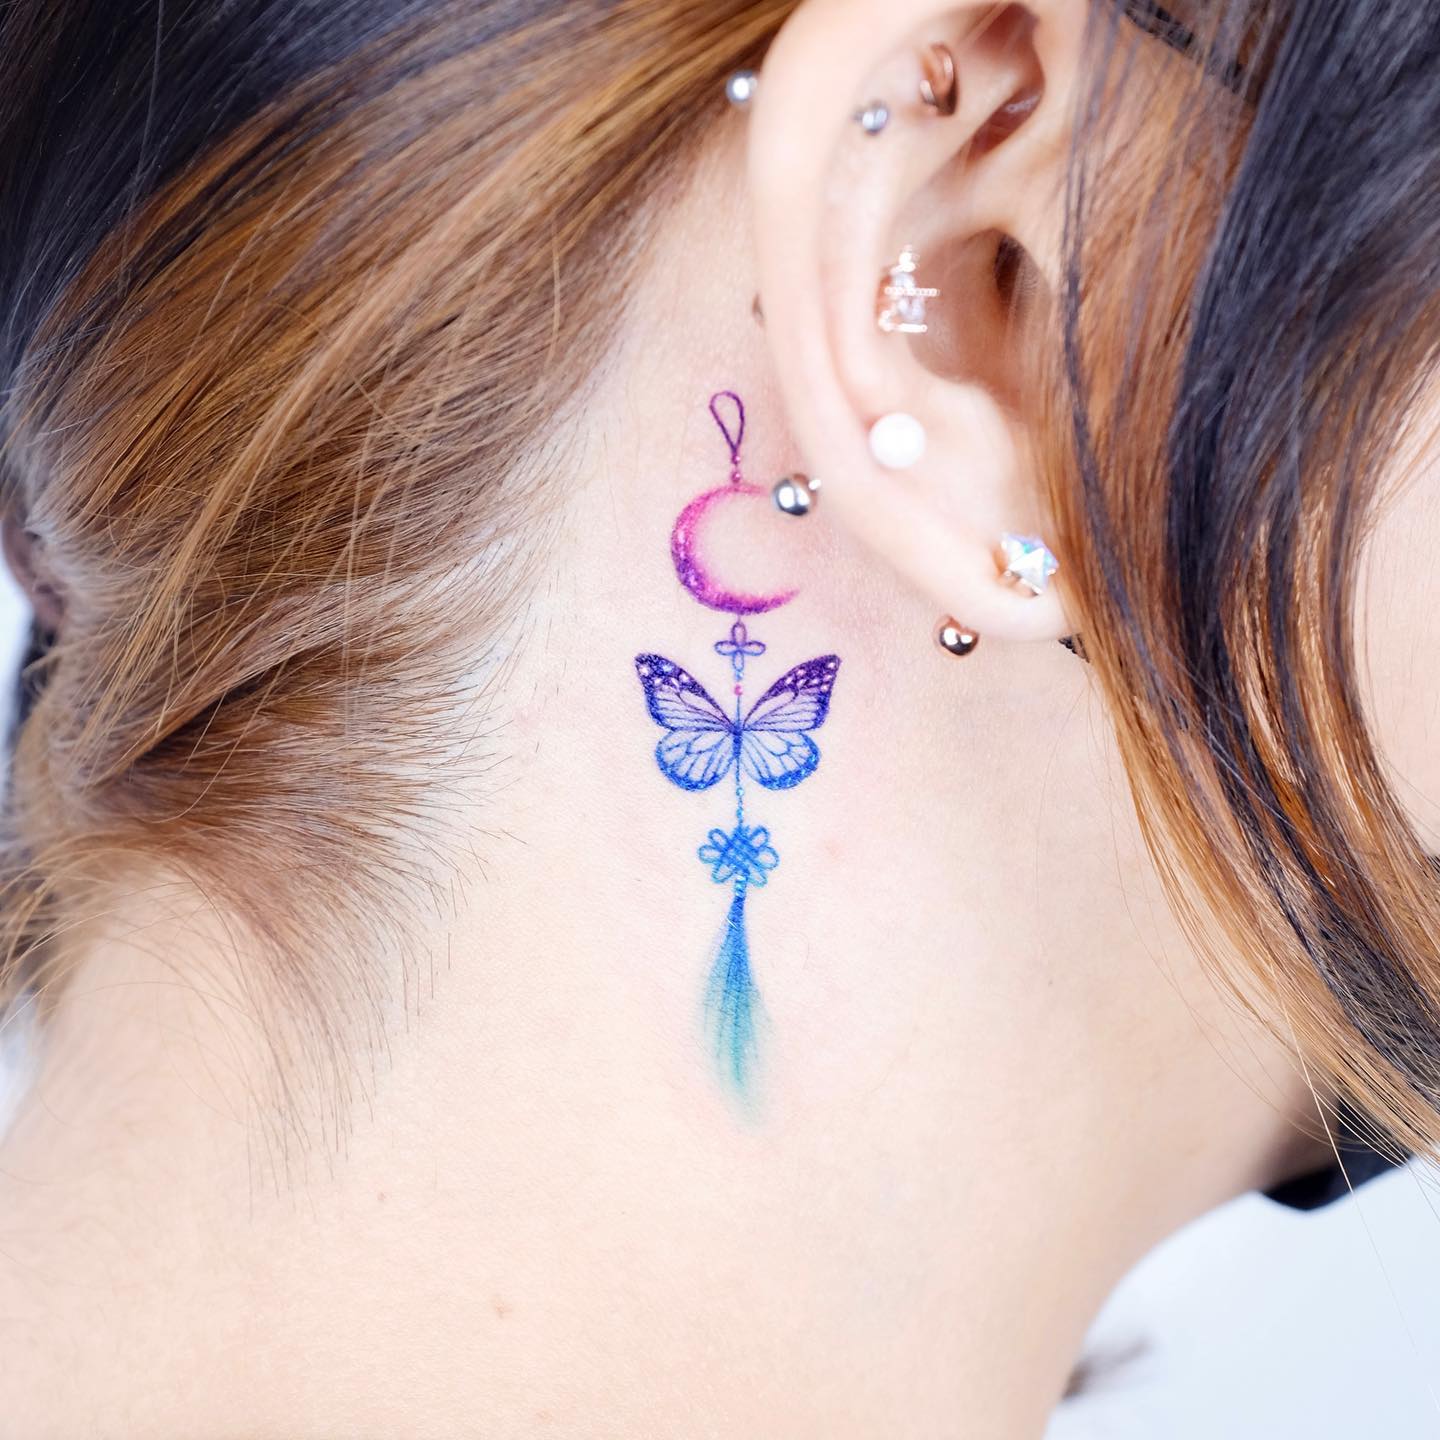 Colorful Butterfly Tattoo Behind Ear